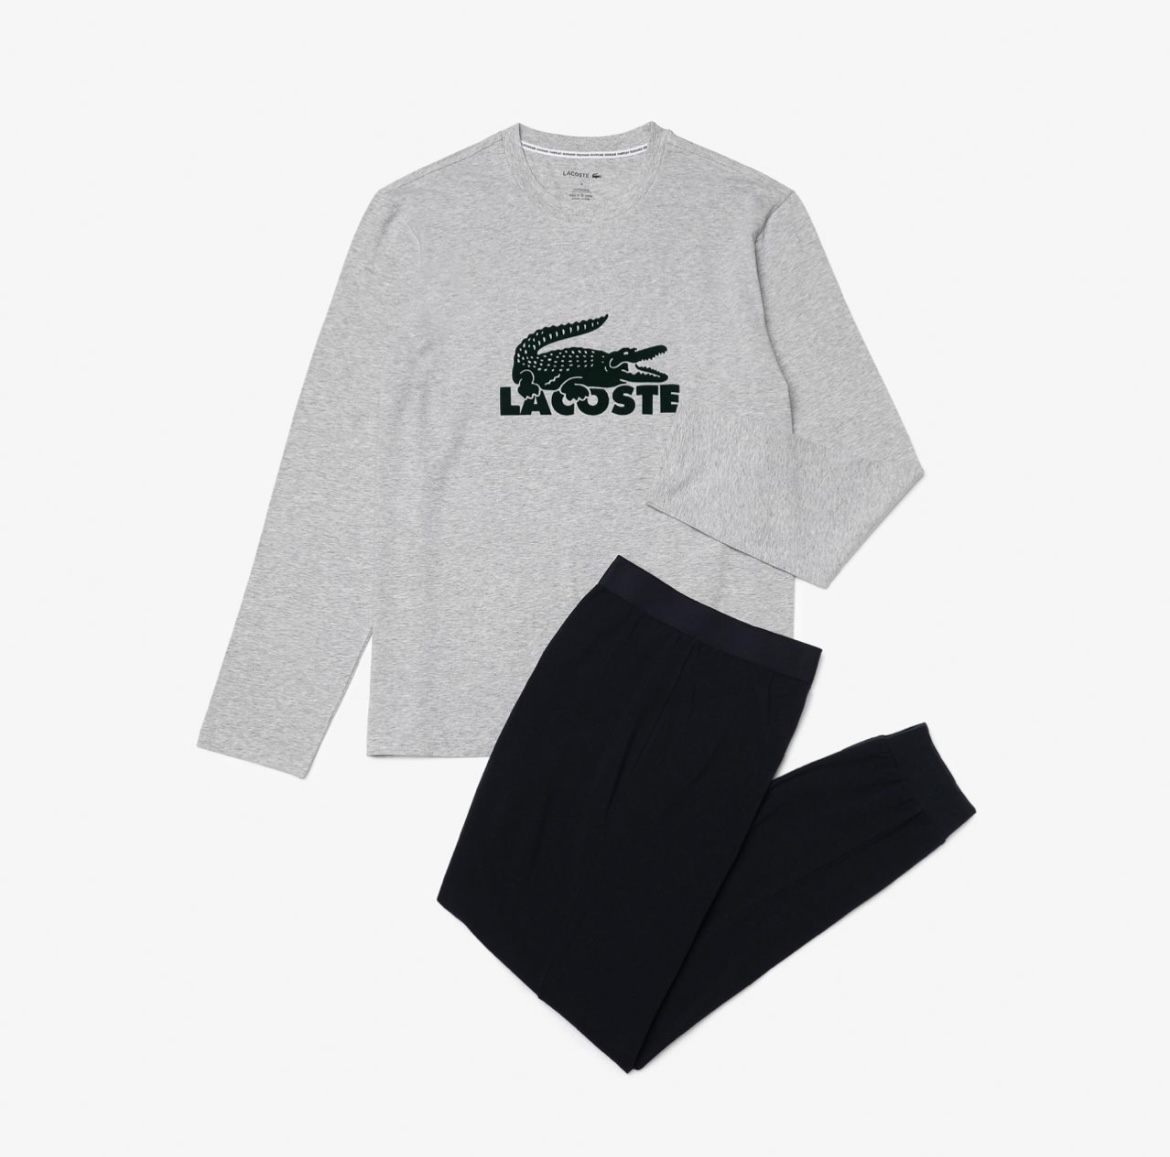 lacoste gift guide